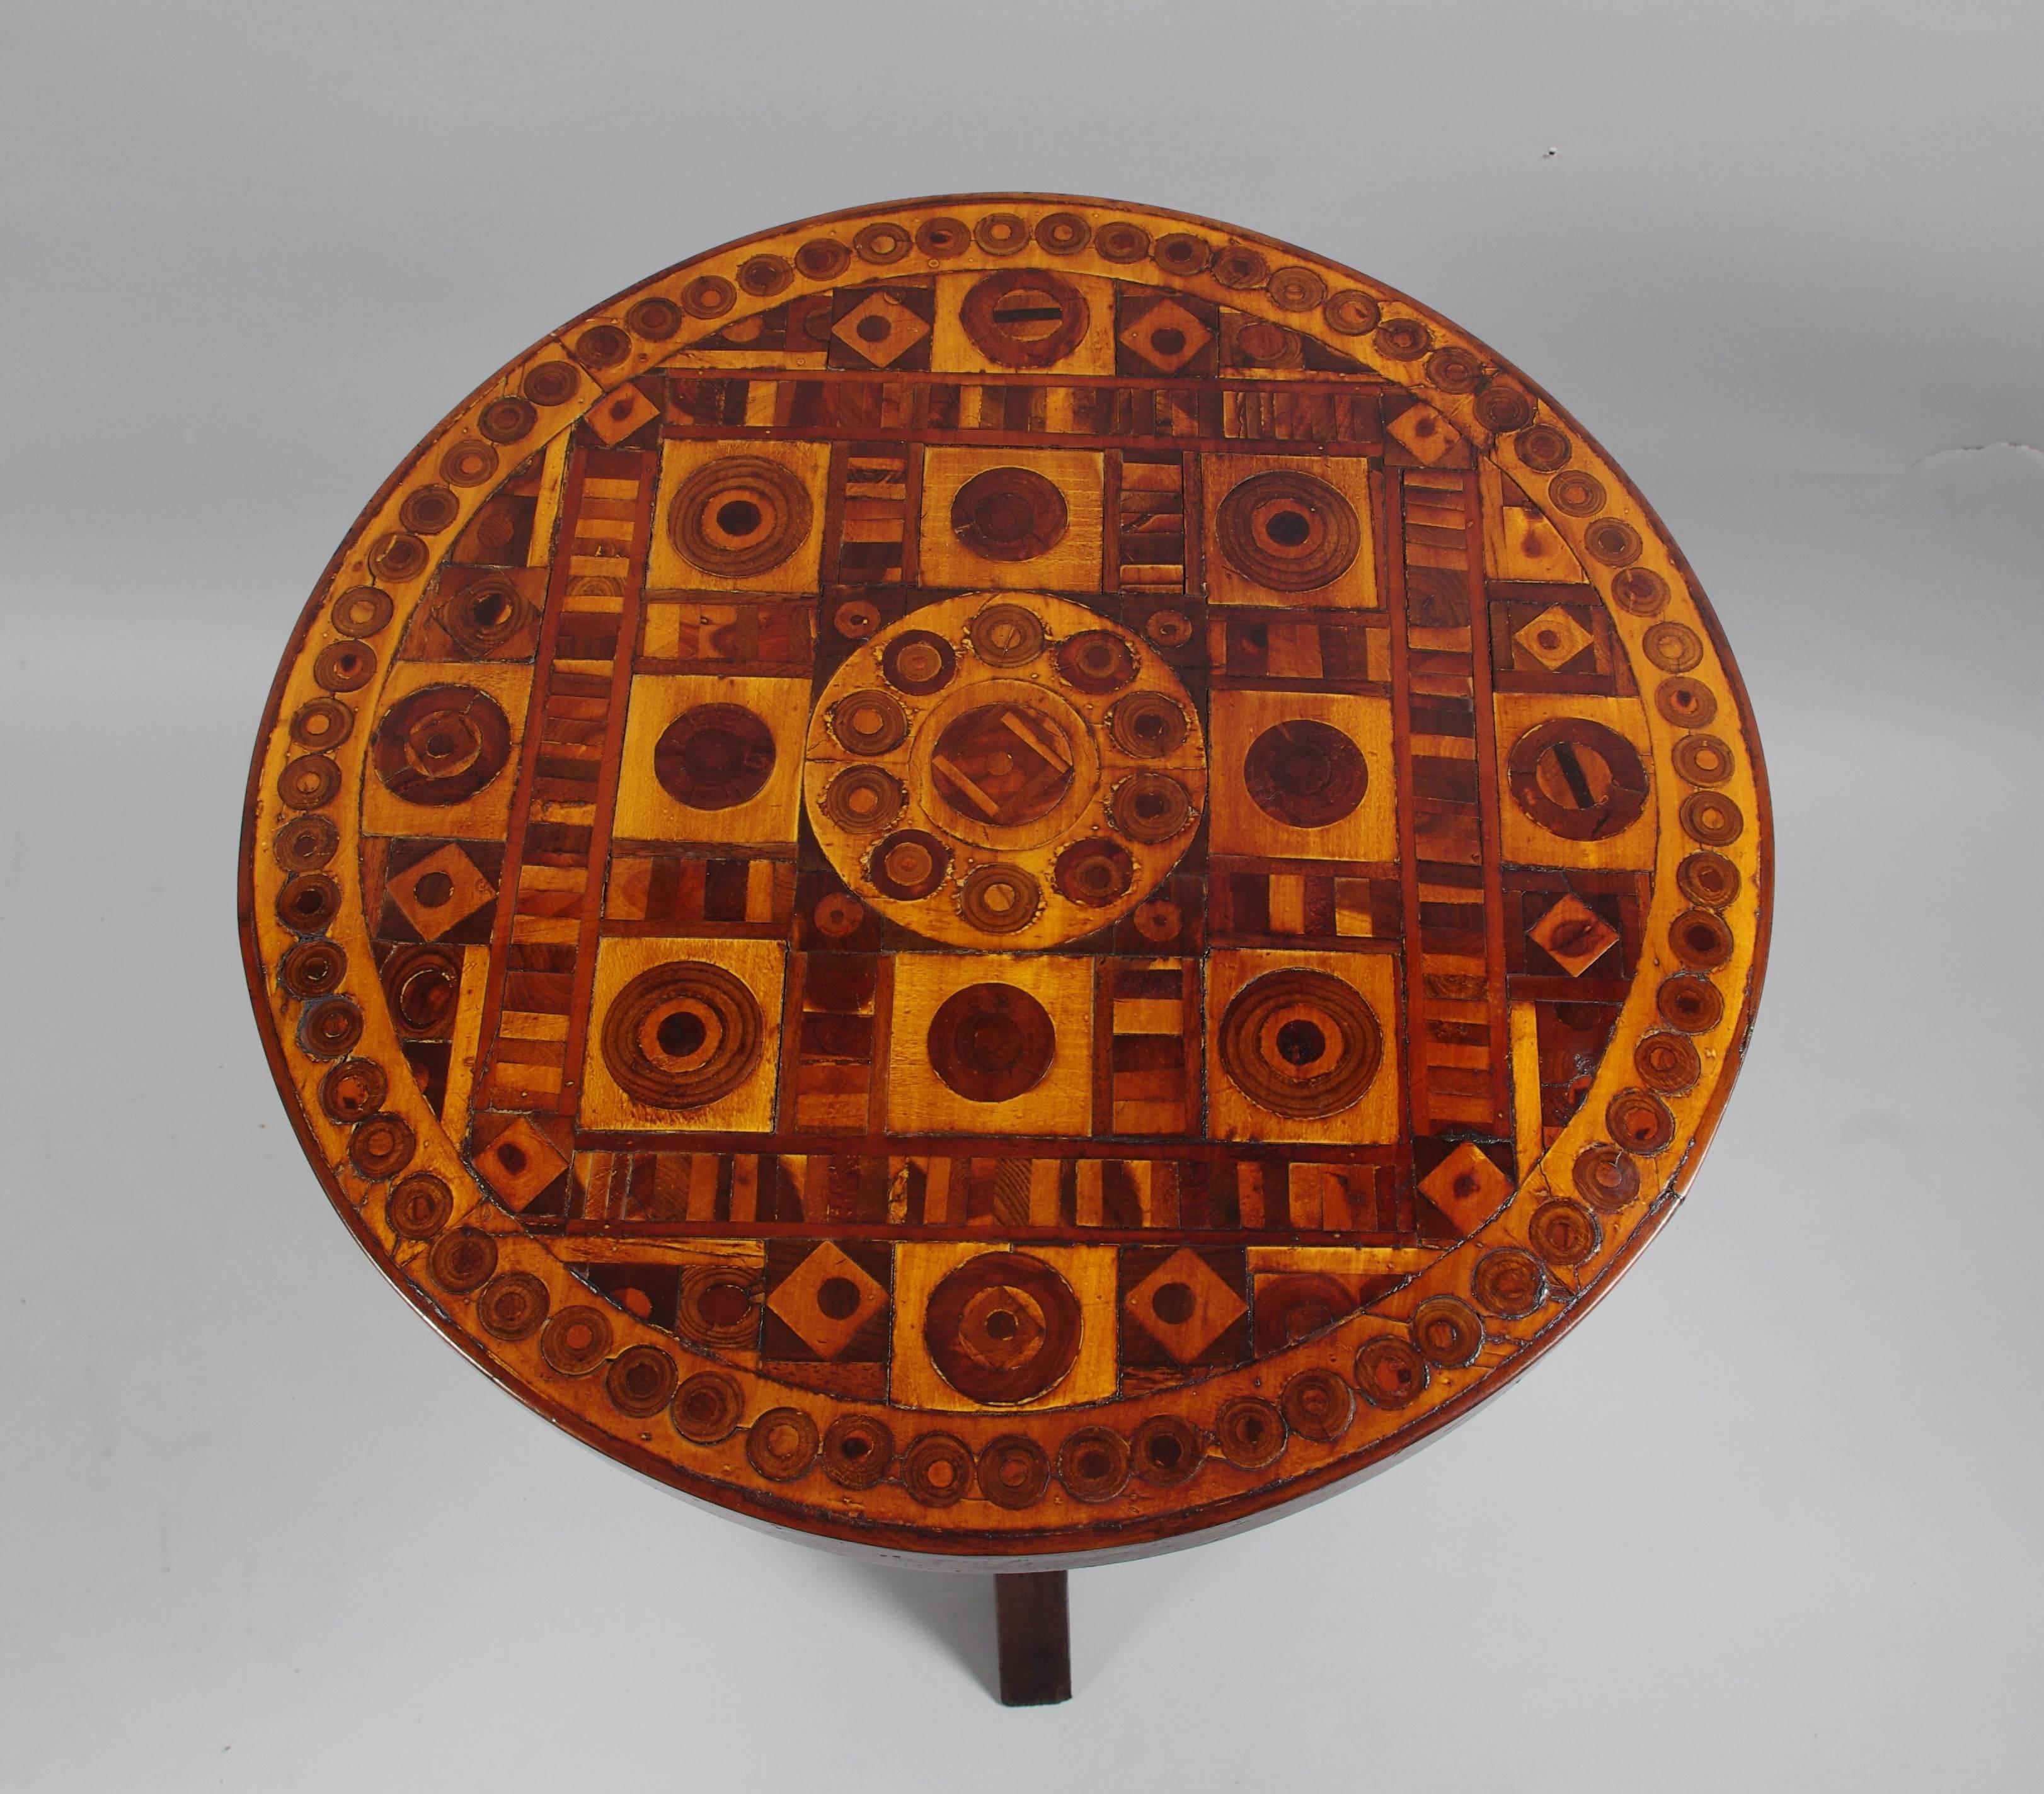 Delightful Folk Art occasional table, the circular top with elaborate geometric inlays on a center post with bullseye inlay supported by four shaped legs, each with a single small inlay to the knees.

This sturdy, exuberant table is stamped four